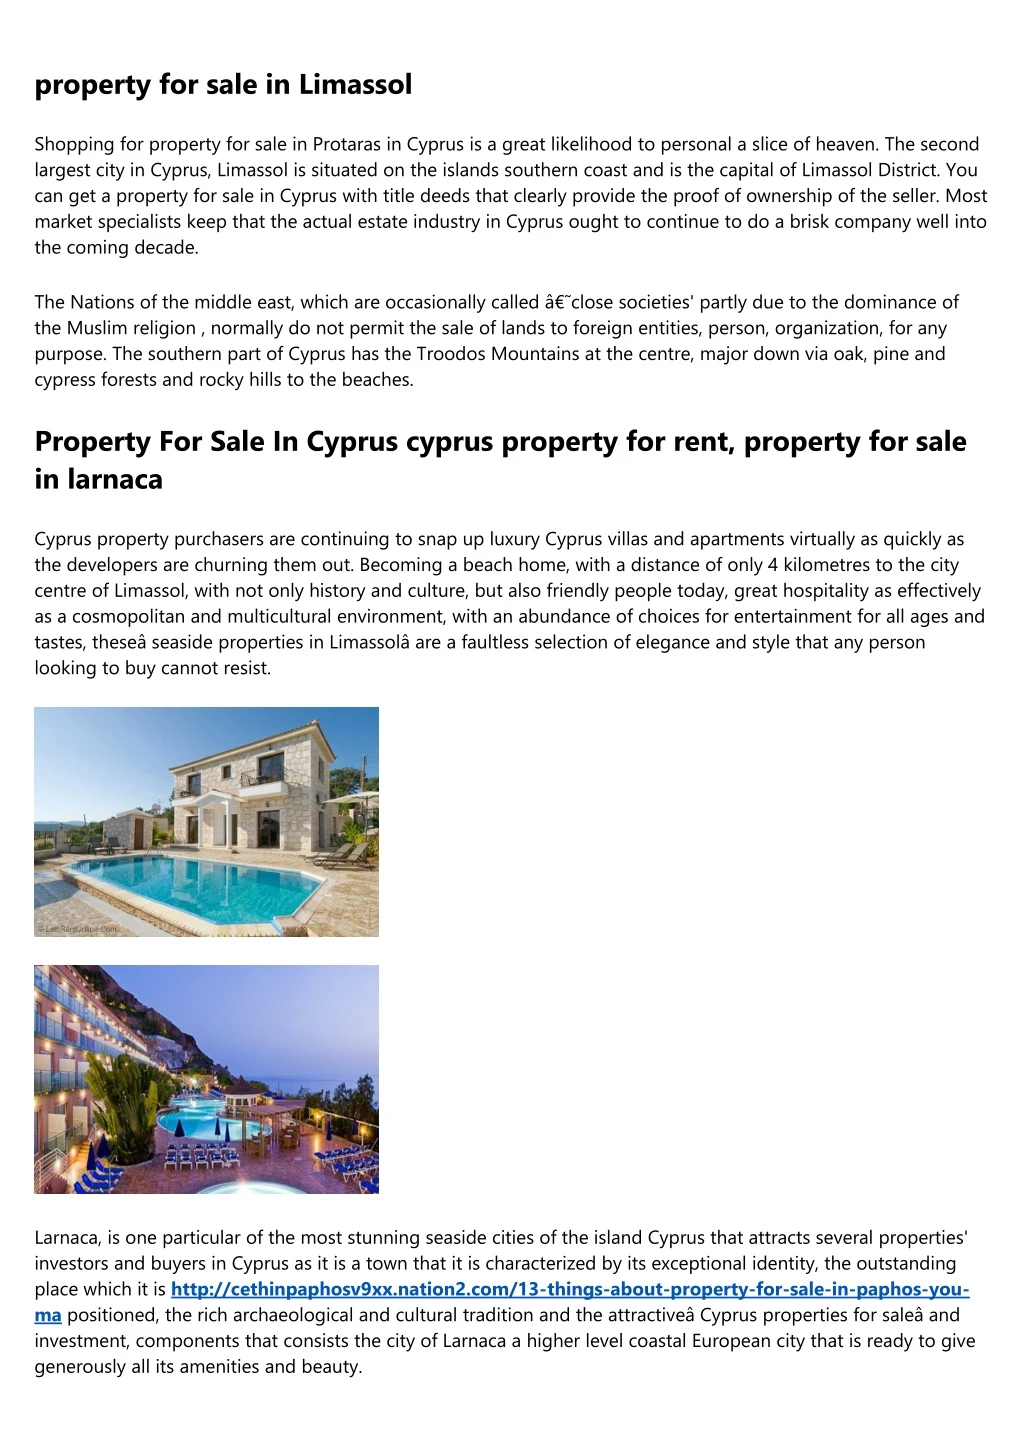 property for sale in limassol